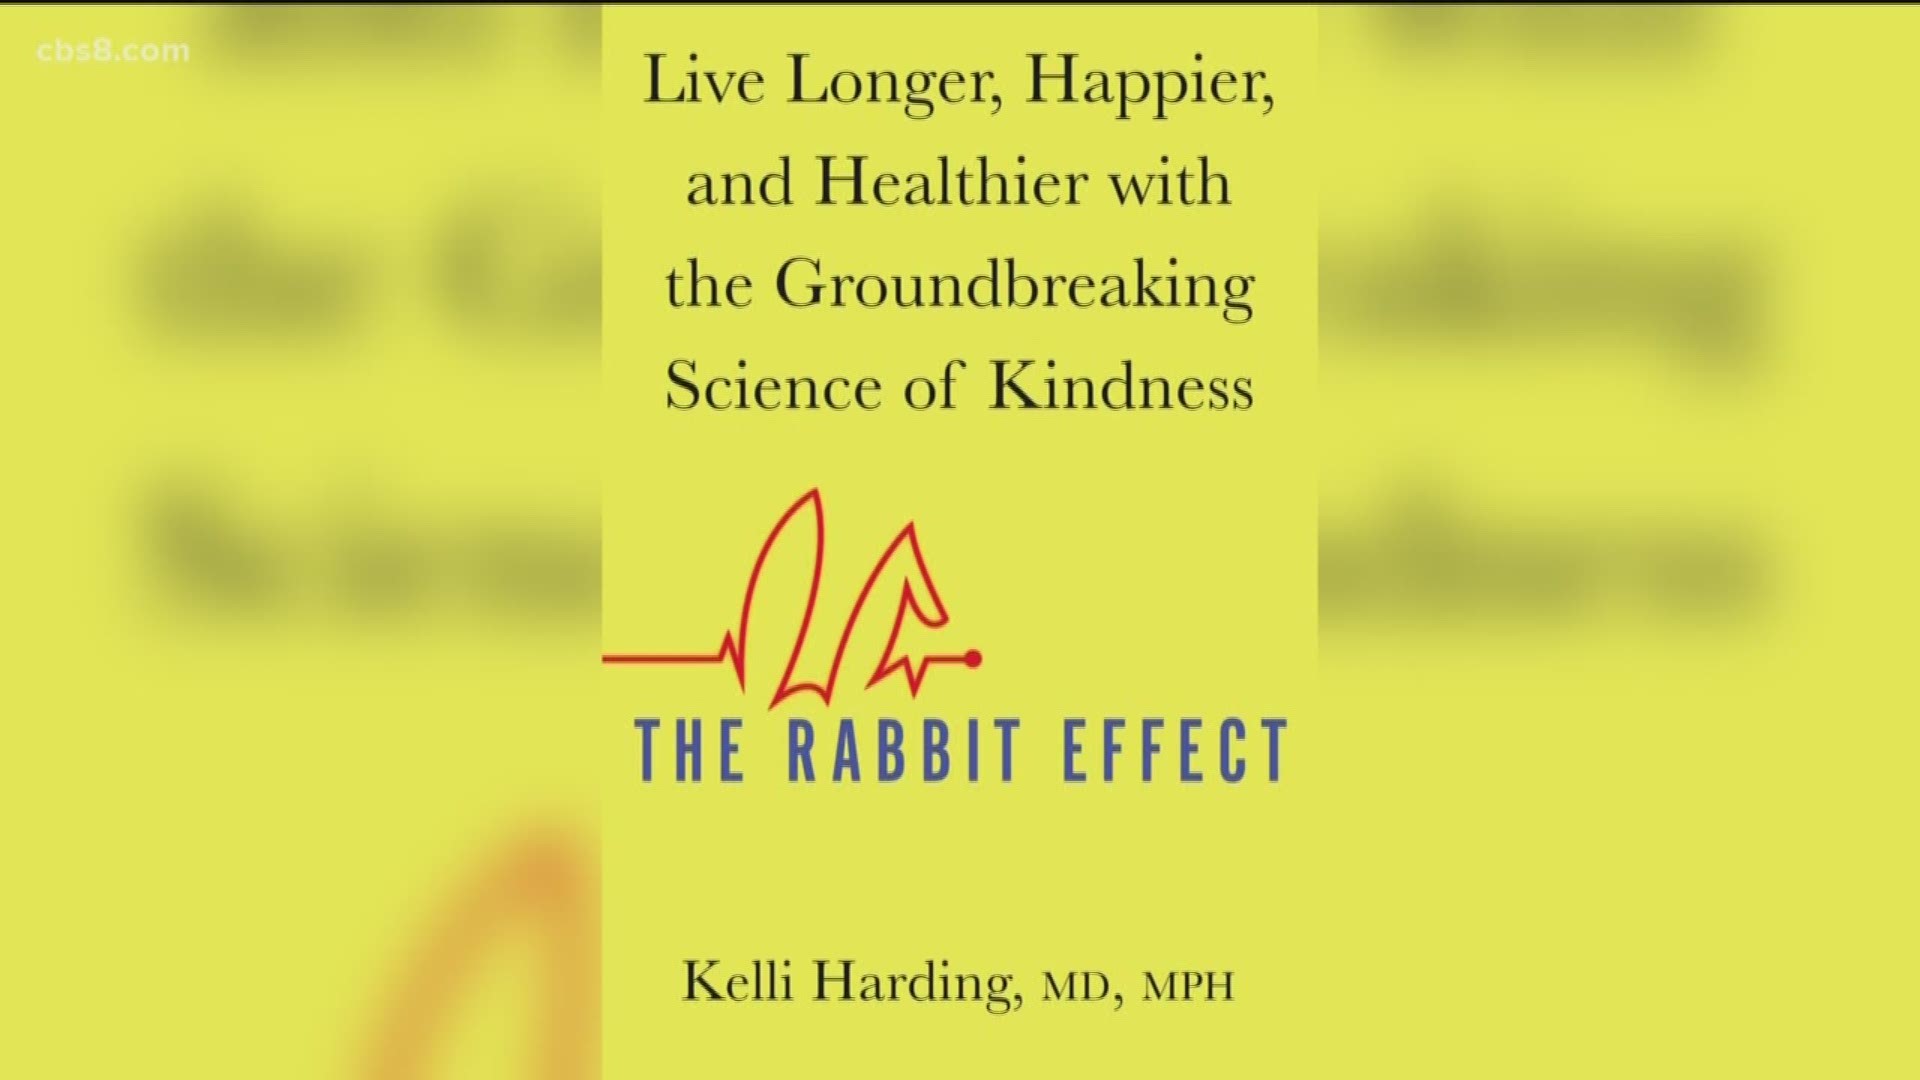 Author of The Rabbit Effect: Live Longer, Happier, and Healthier with the Groundbreaking Science of Kindness. Dr. Kelli Harding is here to share more about the link from mental health and physical health and how to start feeling better now.